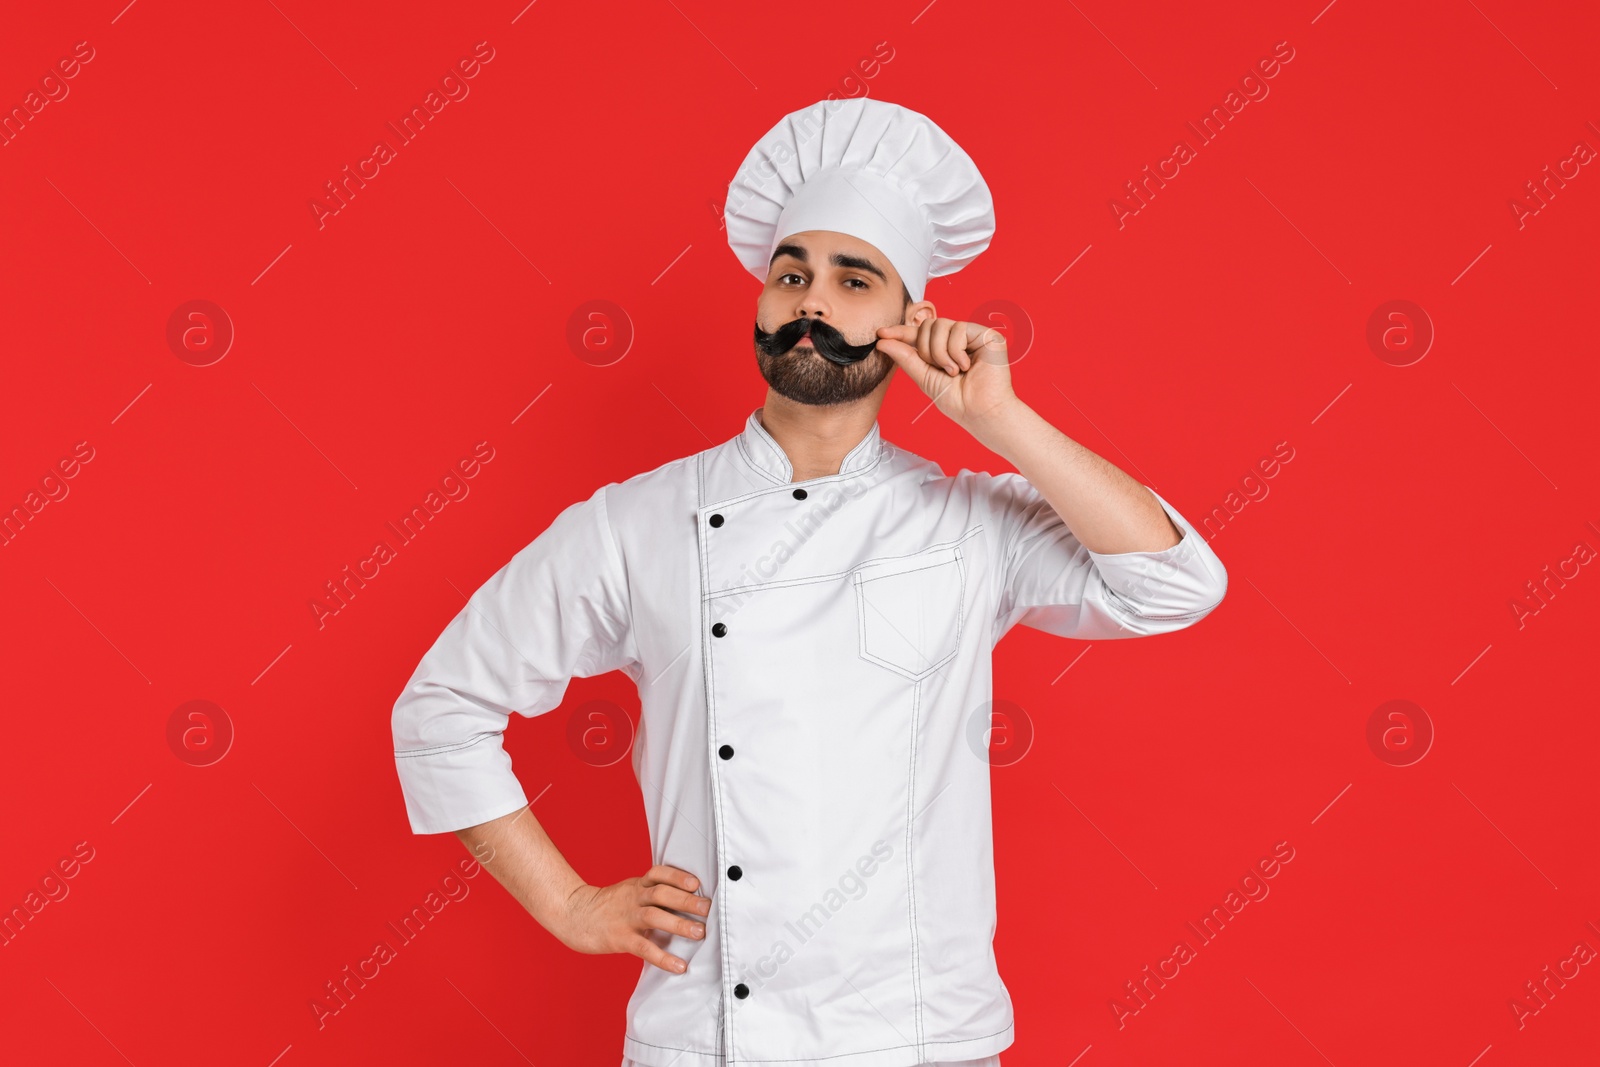 Photo of Professional chef with funny artificial moustache on red background